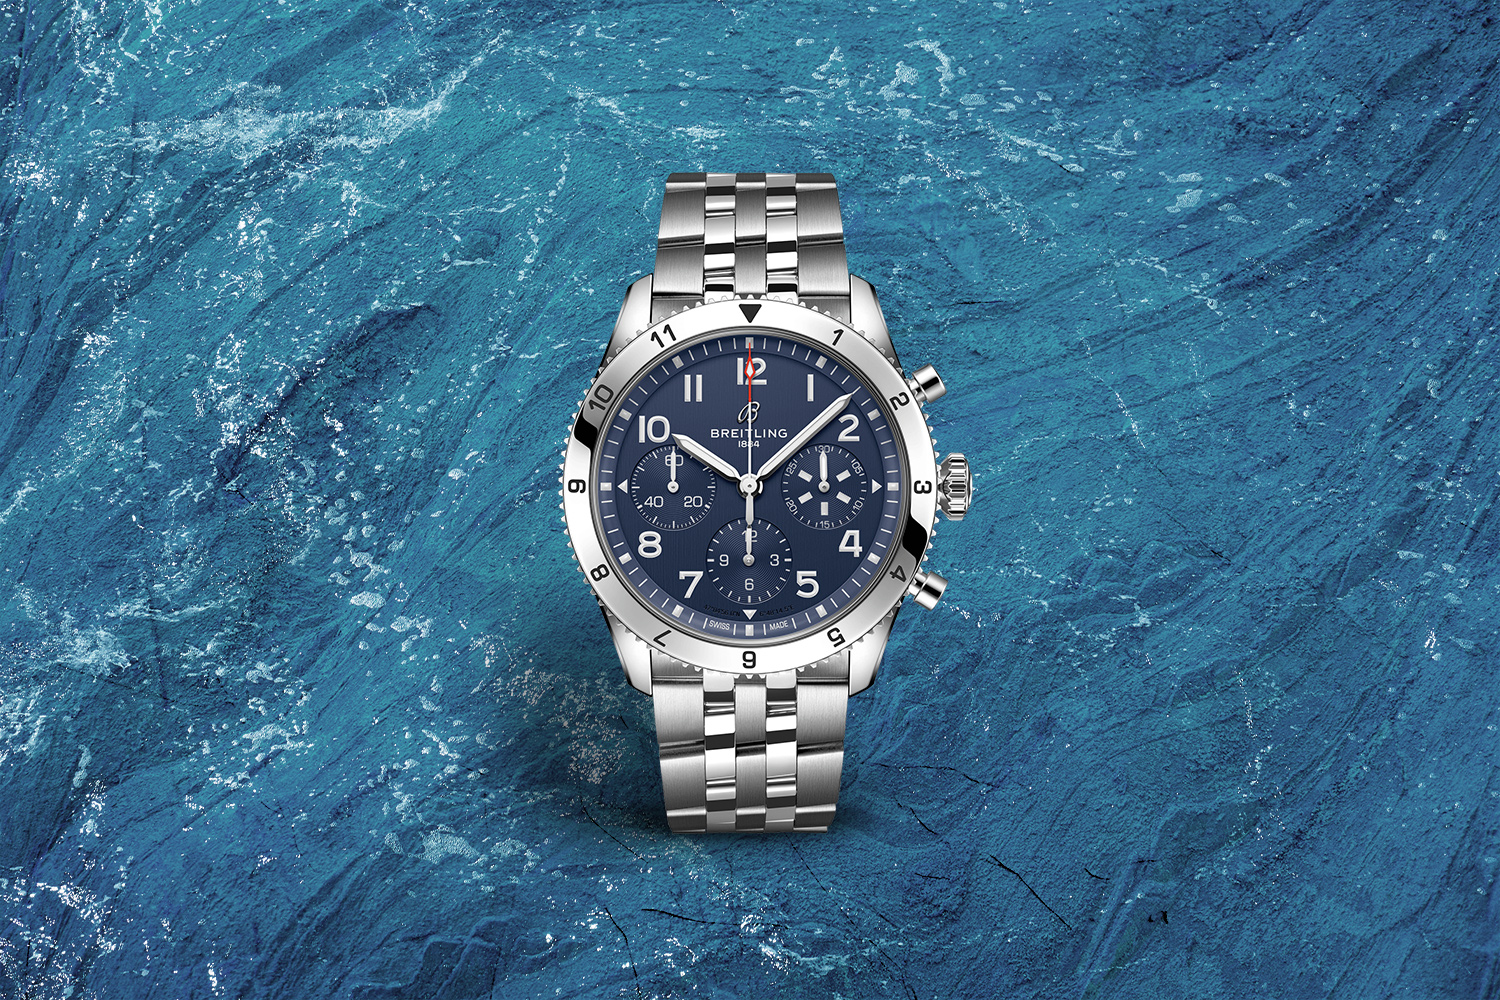 Silver and dark blue watch with very nautical vibes